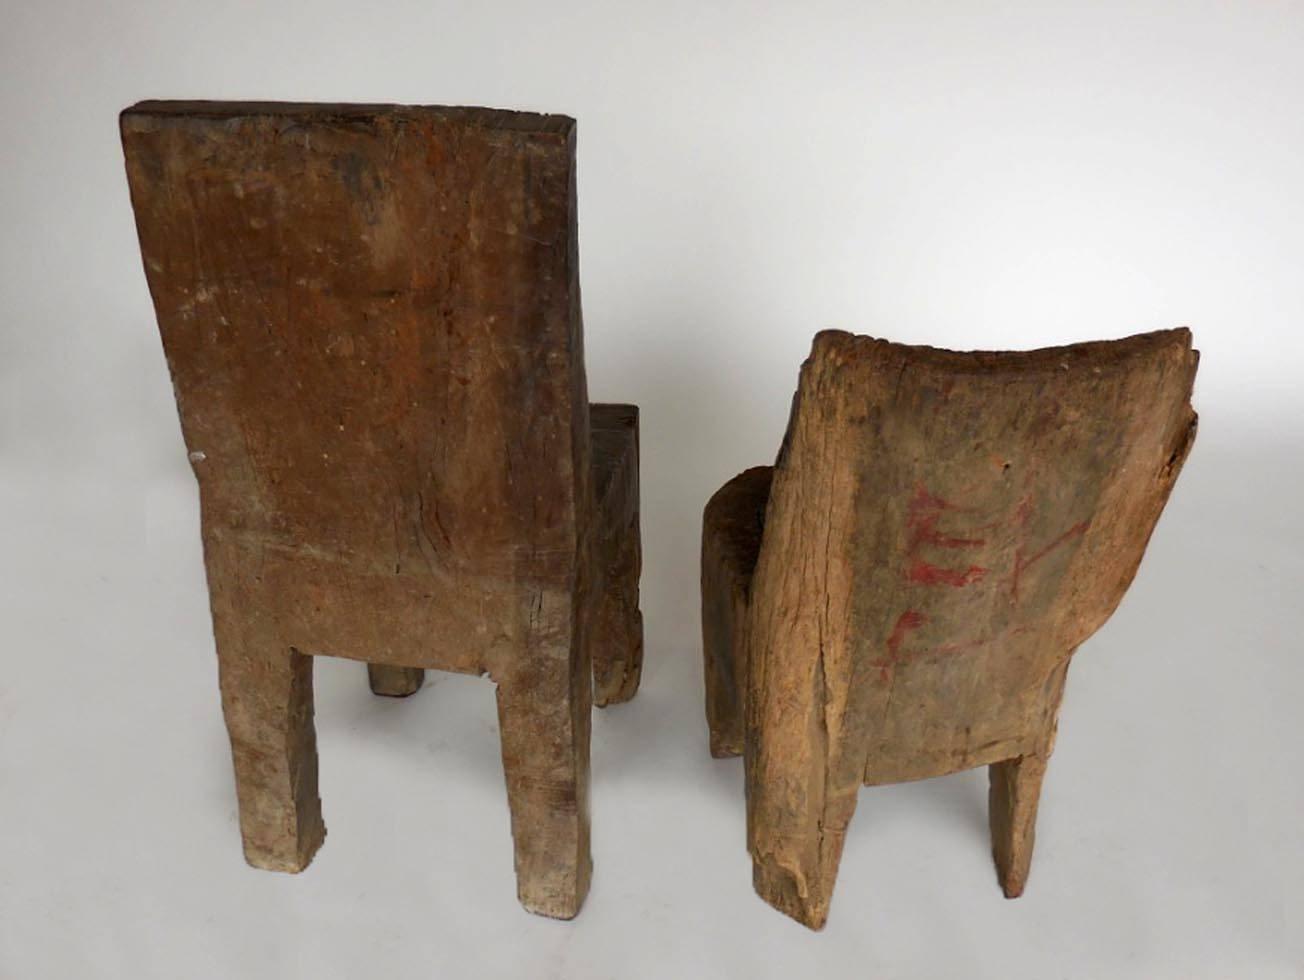 Primitive Solid Wood Low Chairs